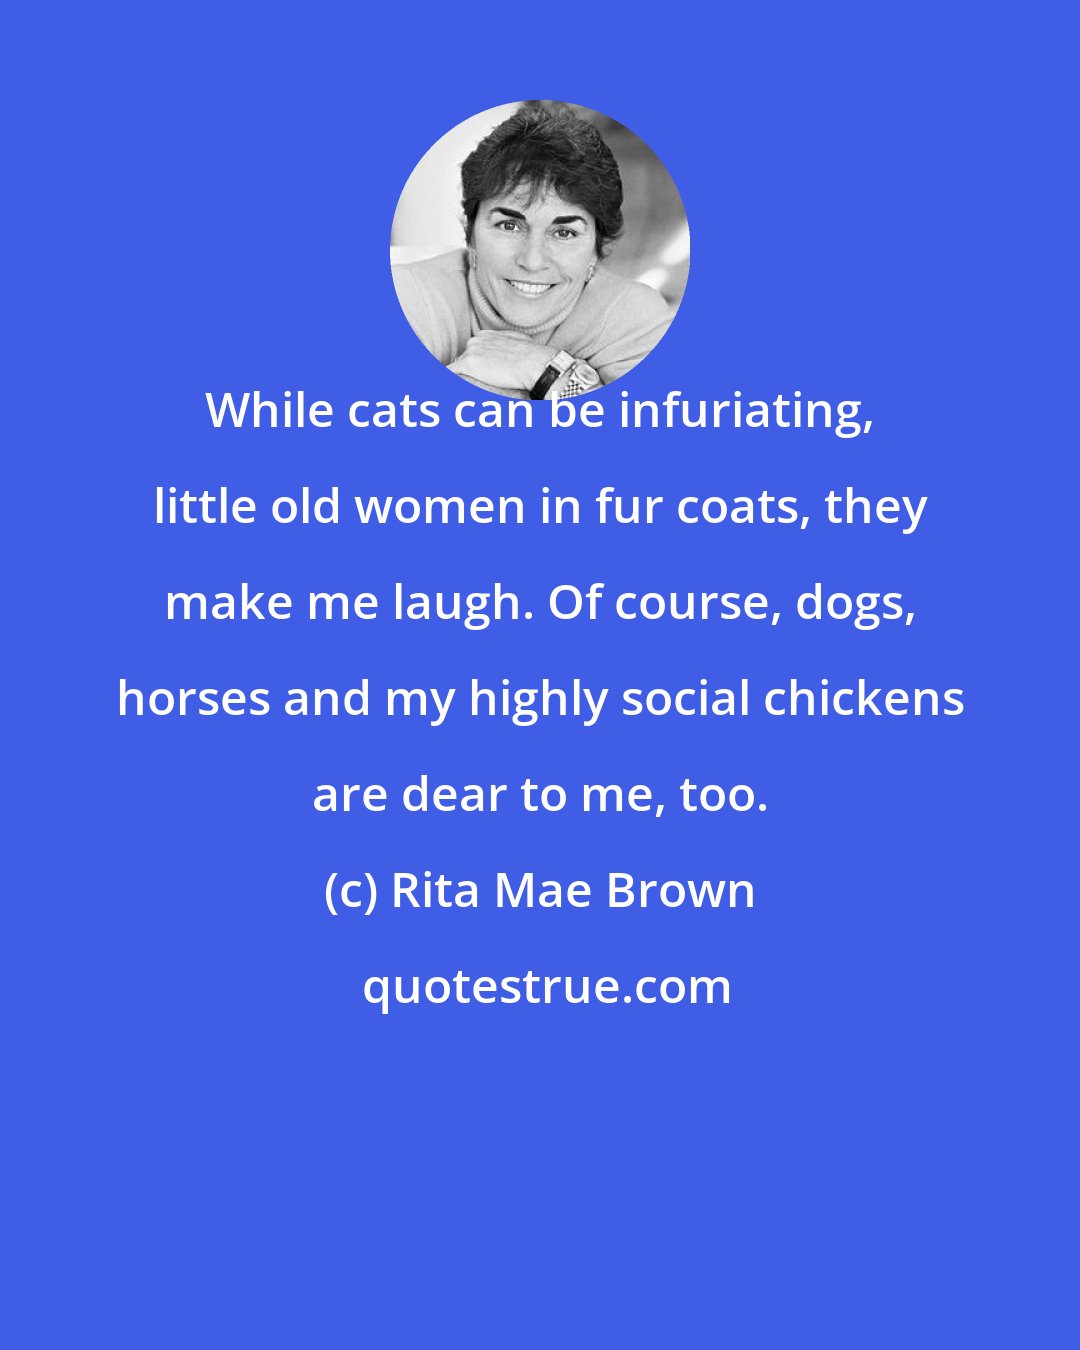 Rita Mae Brown: While cats can be infuriating, little old women in fur coats, they make me laugh. Of course, dogs, horses and my highly social chickens are dear to me, too.